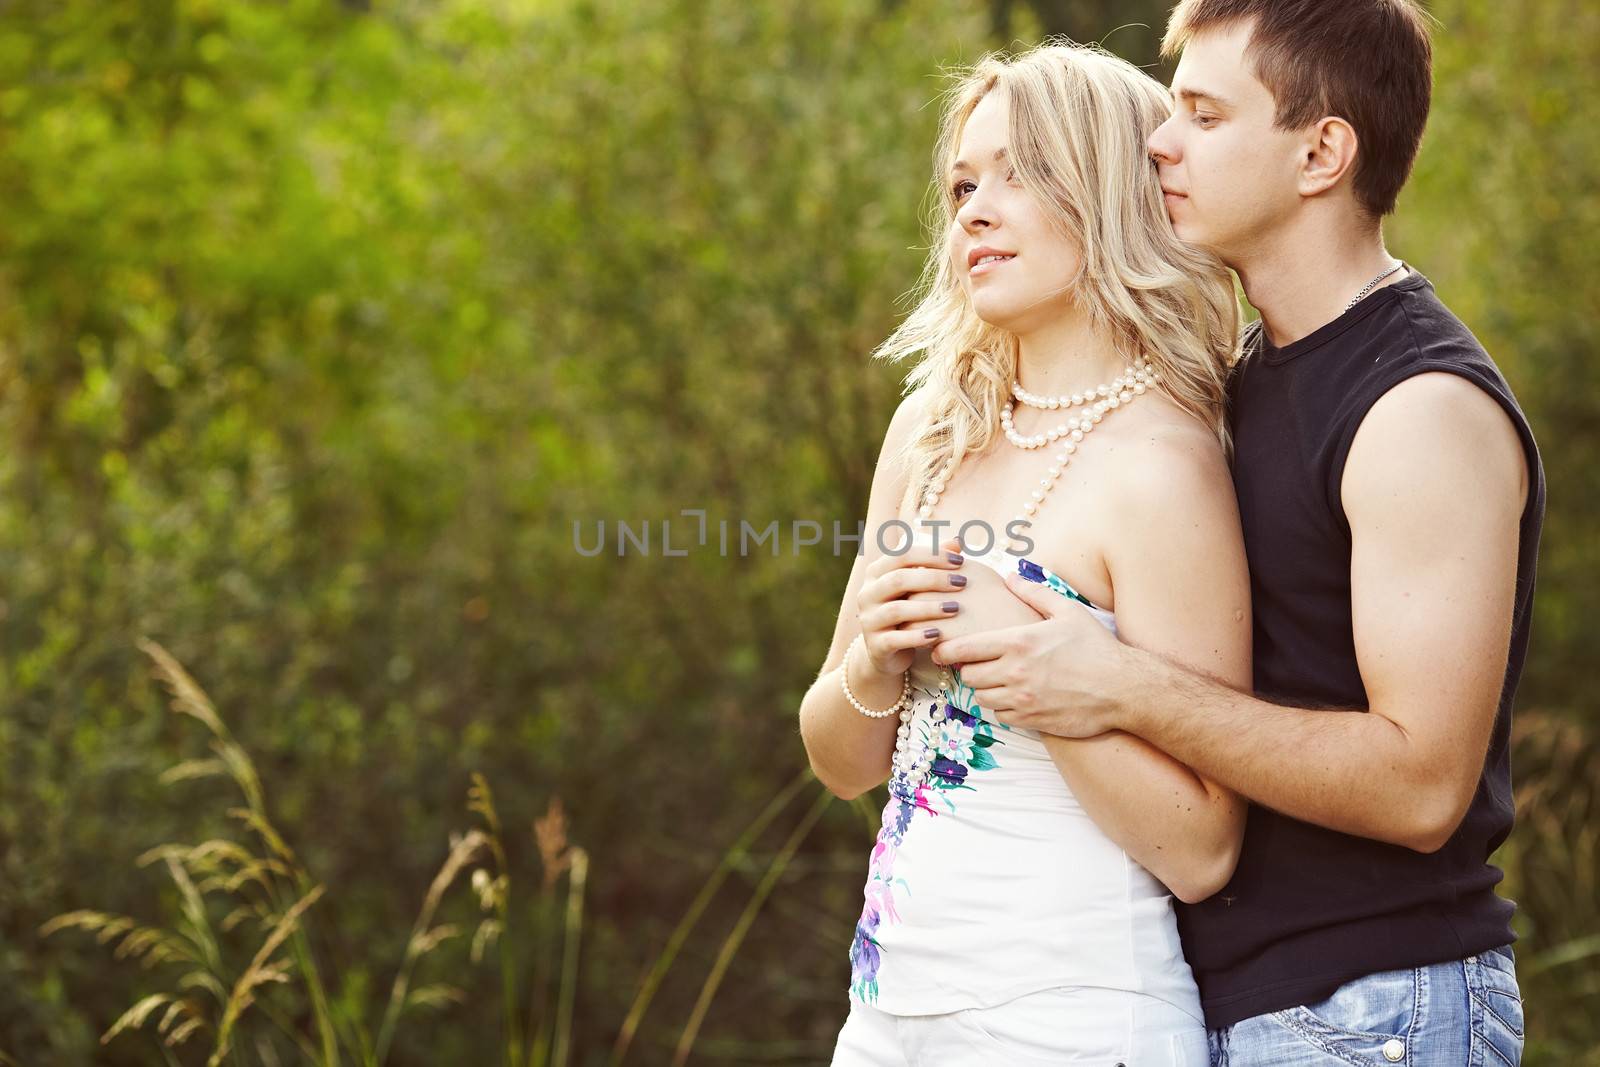 Man and woman embracing and looking into the distance